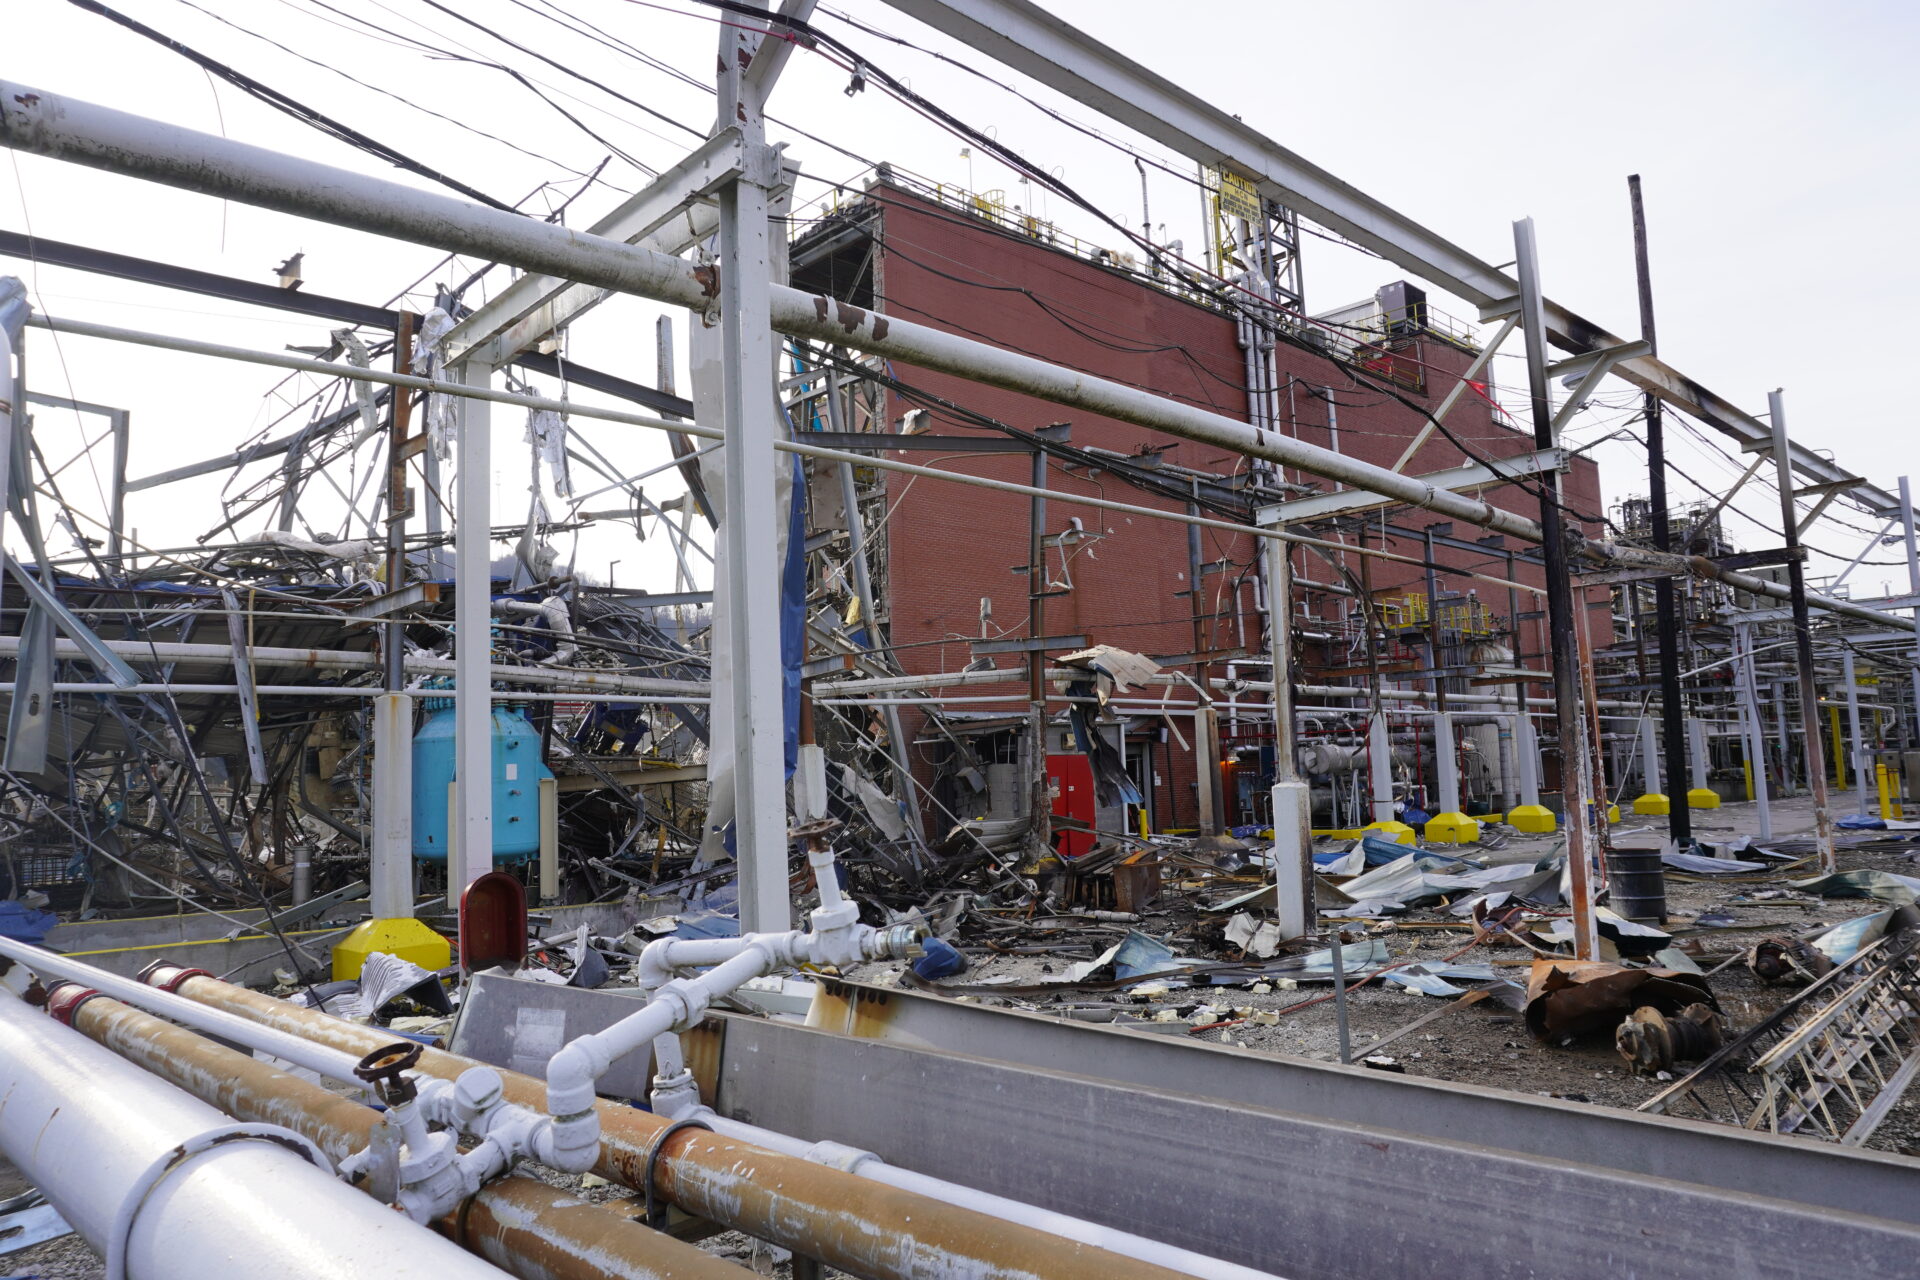 State Approves Air Quality Permit For Factory Where Explosion Killed 1